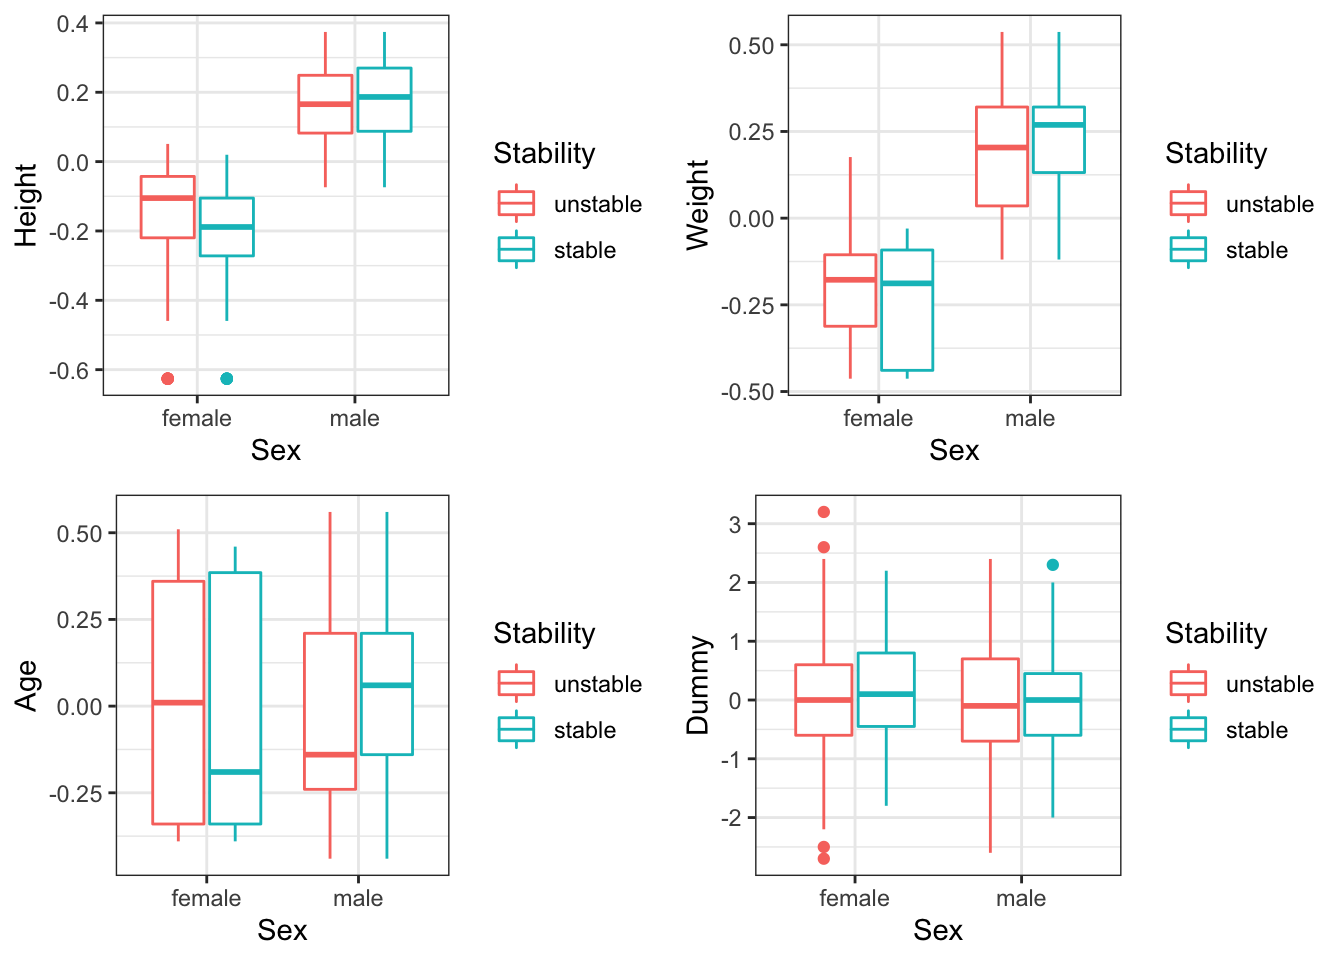 The height/weight/age/dummy variable of individuals split by sex and stability.